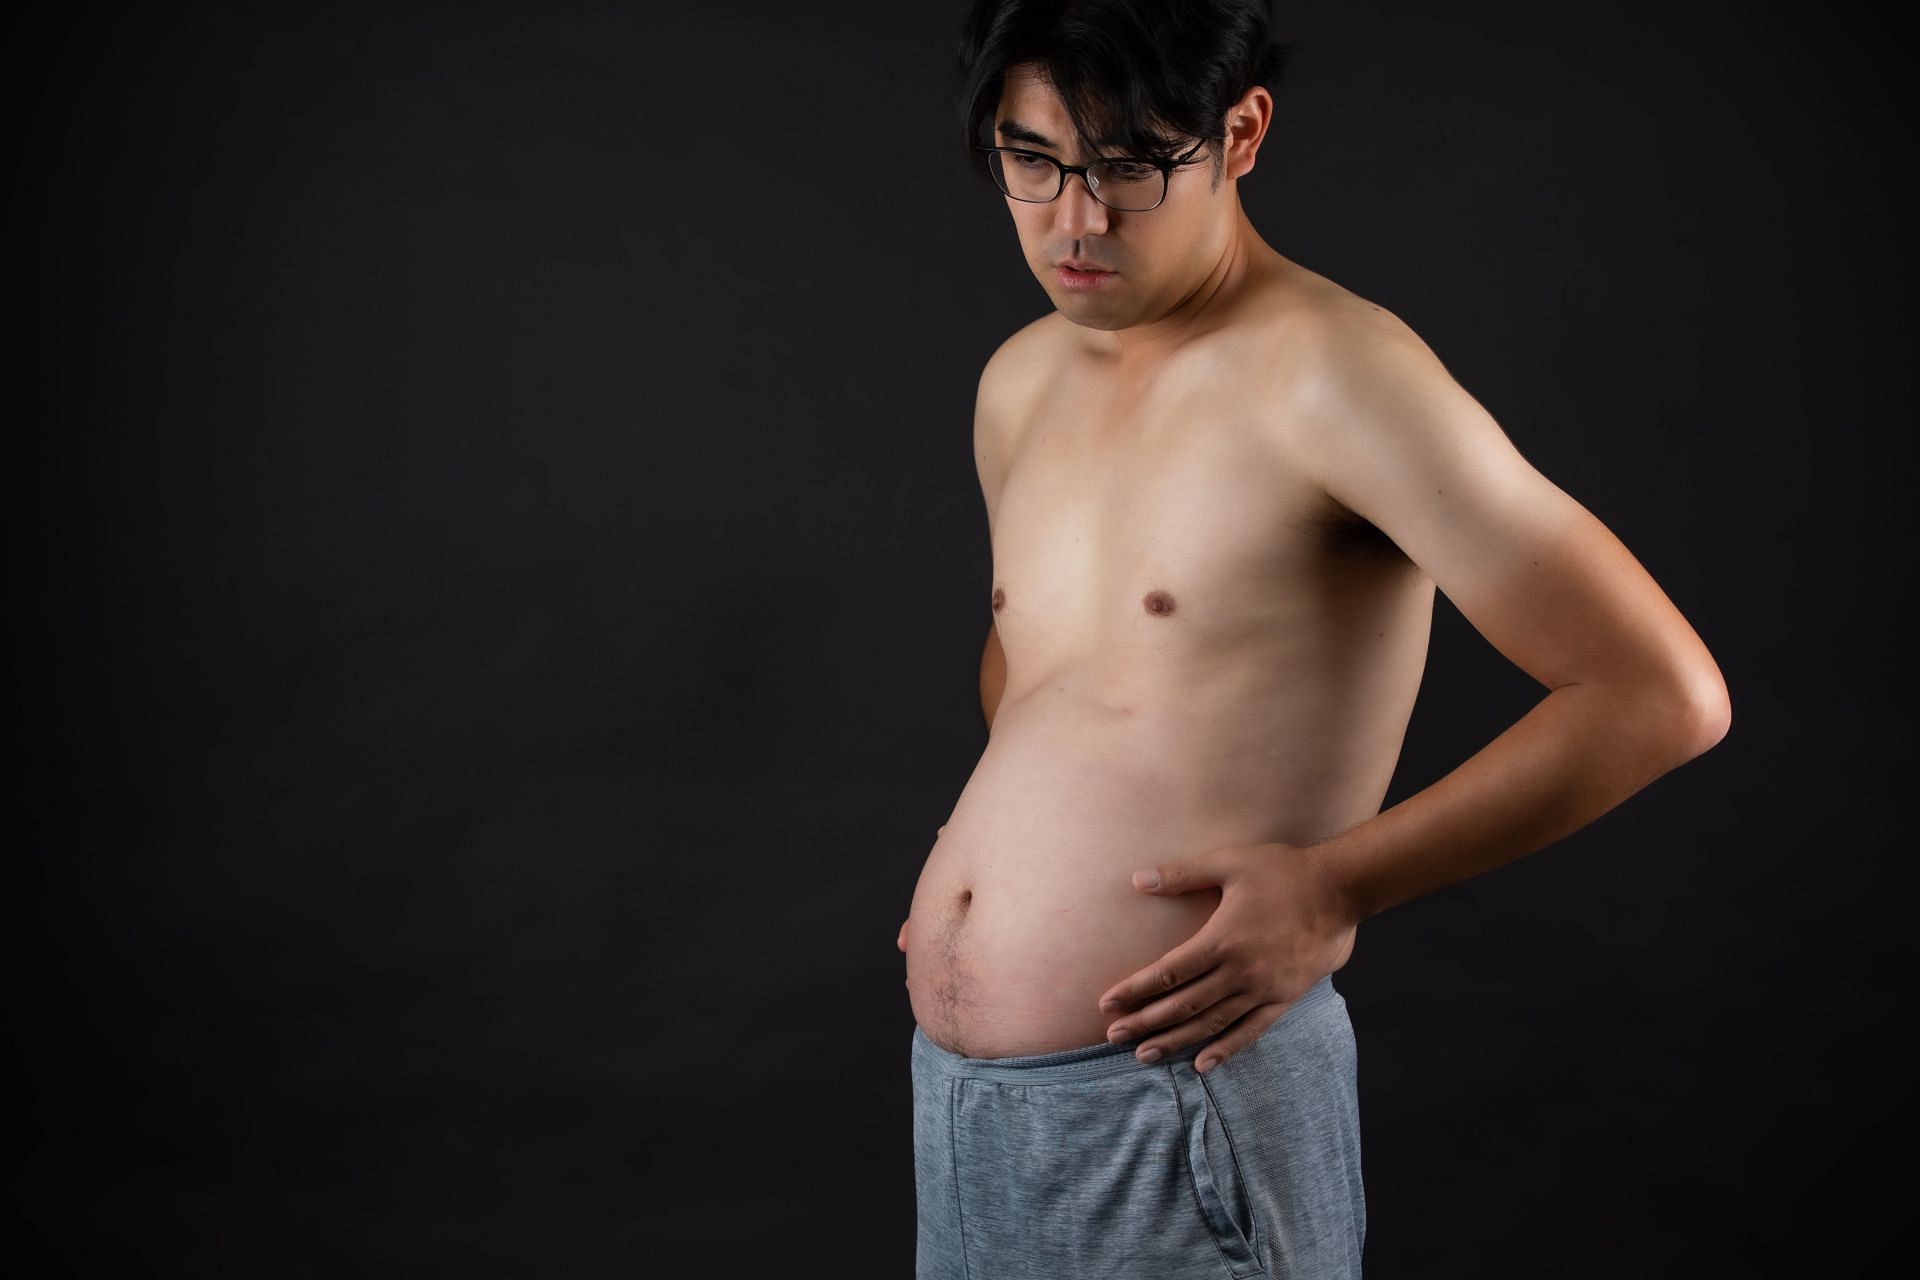 Common bloating causes include constipation. (Image via Unsplash/ Sean S)